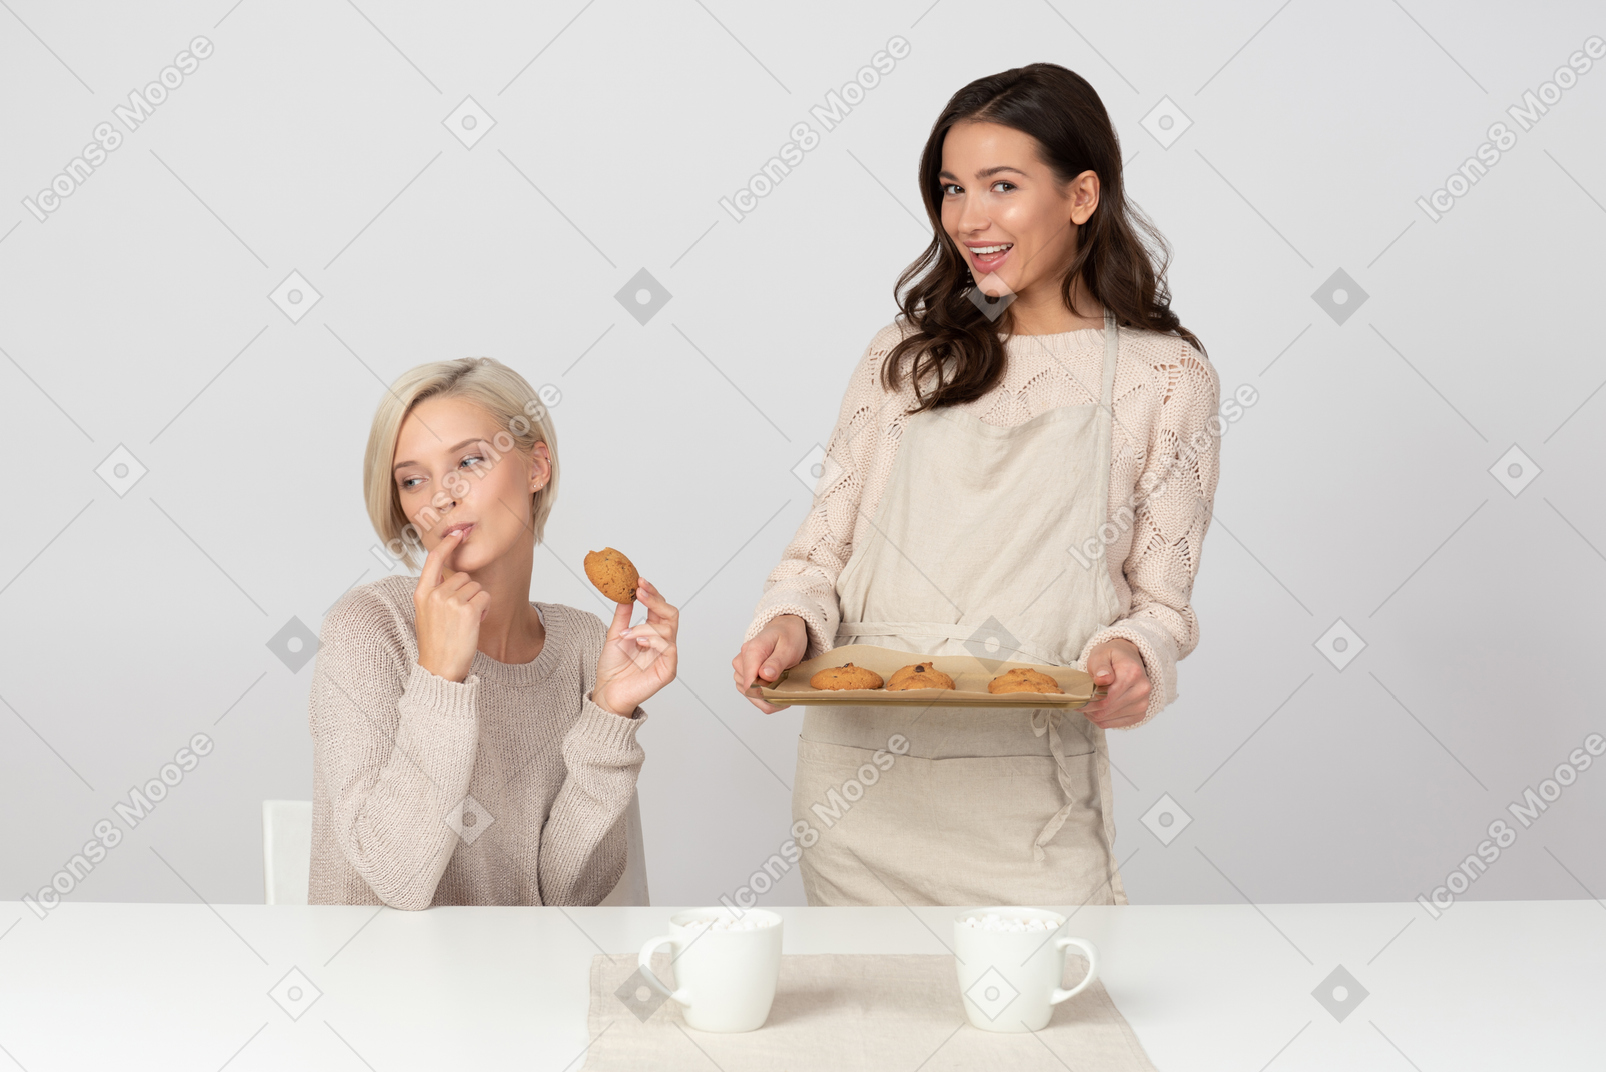 Young woman offering homemade cookies to her friend